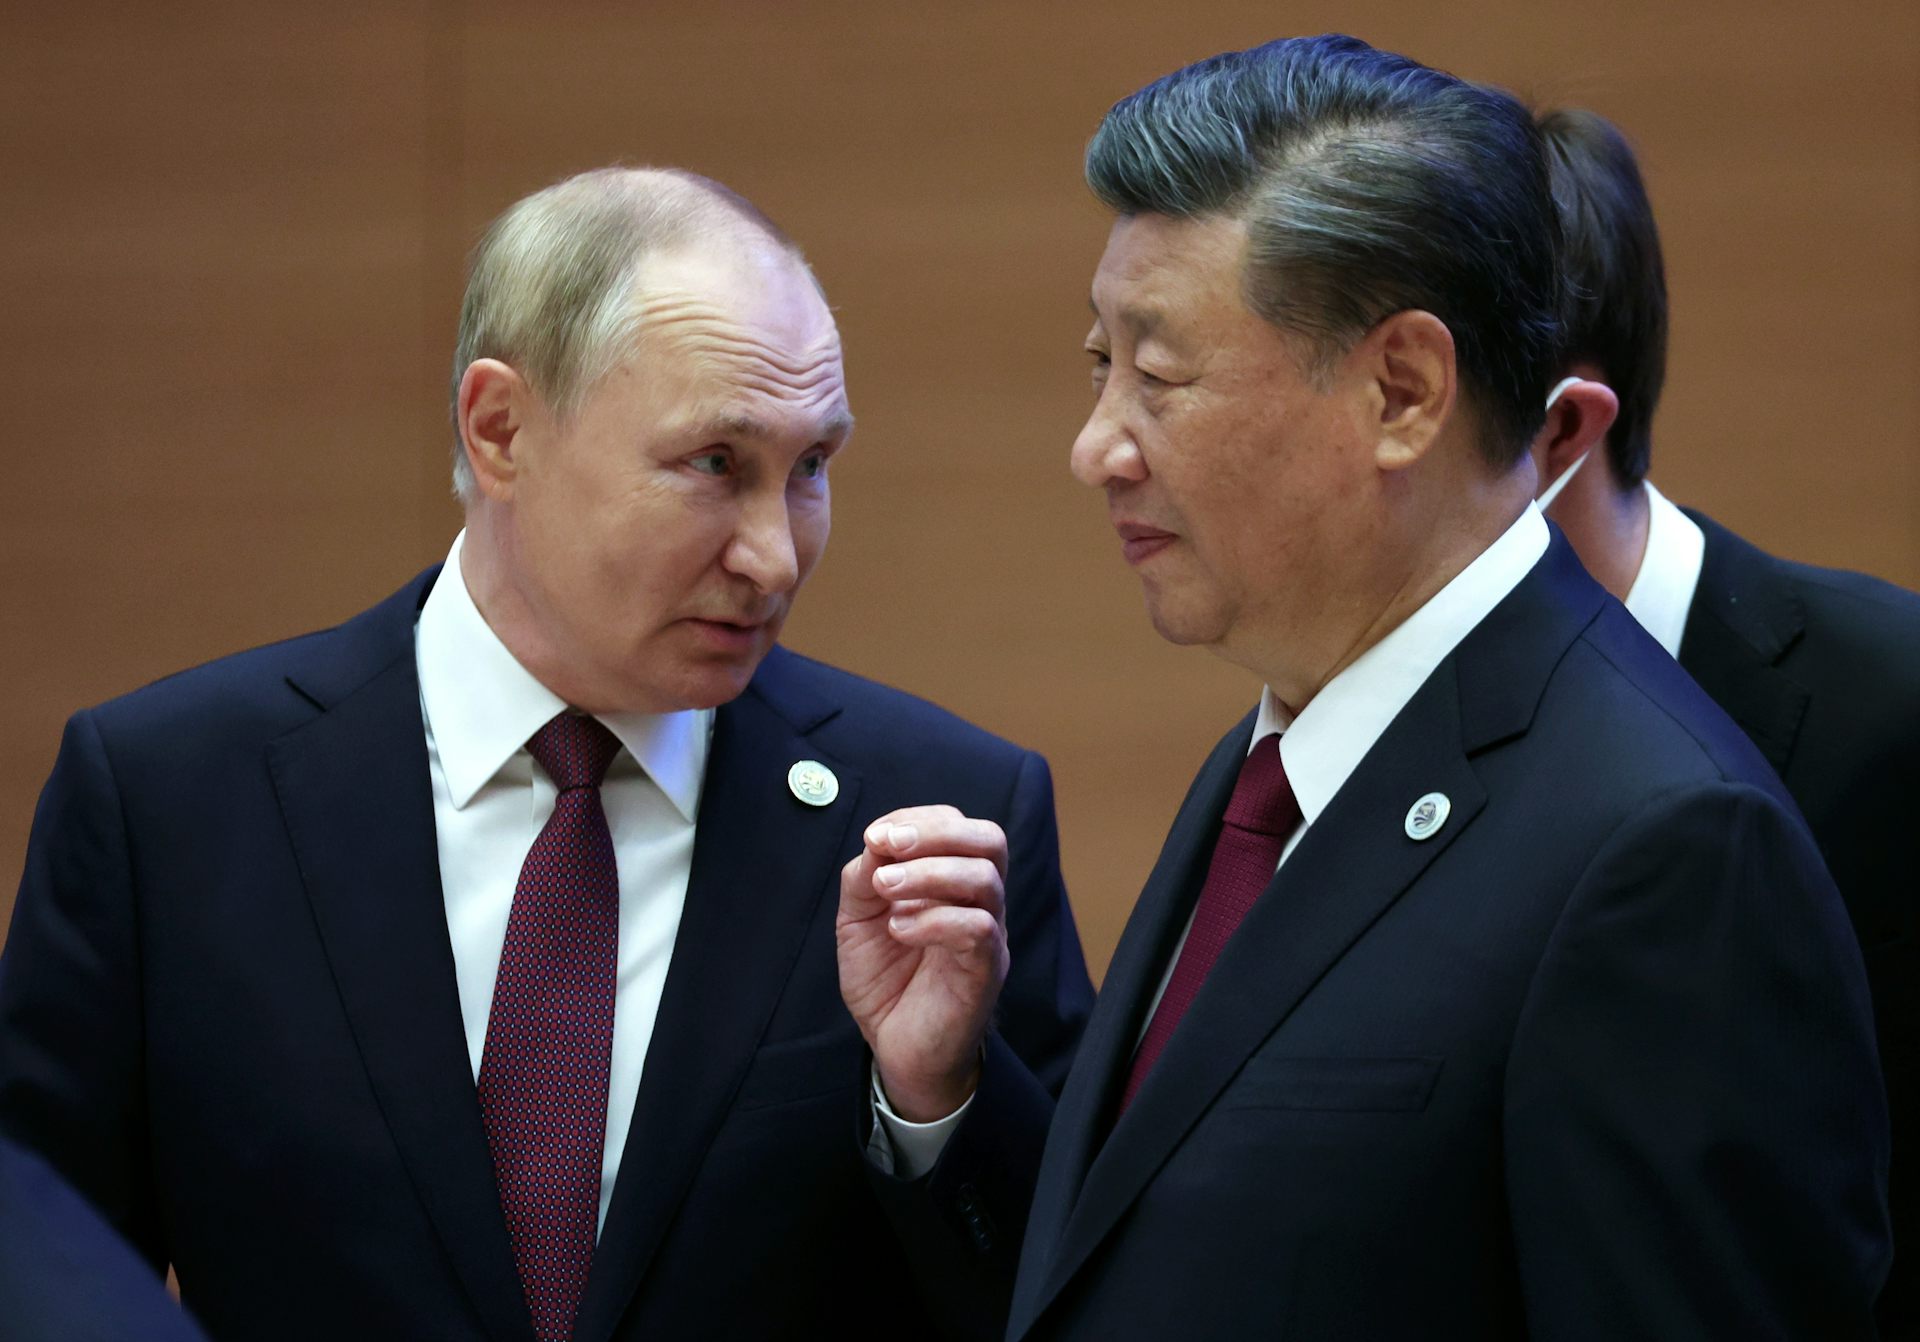 Putin’s failure will pave the way for China’s rise to pre-eminence in Eurasia